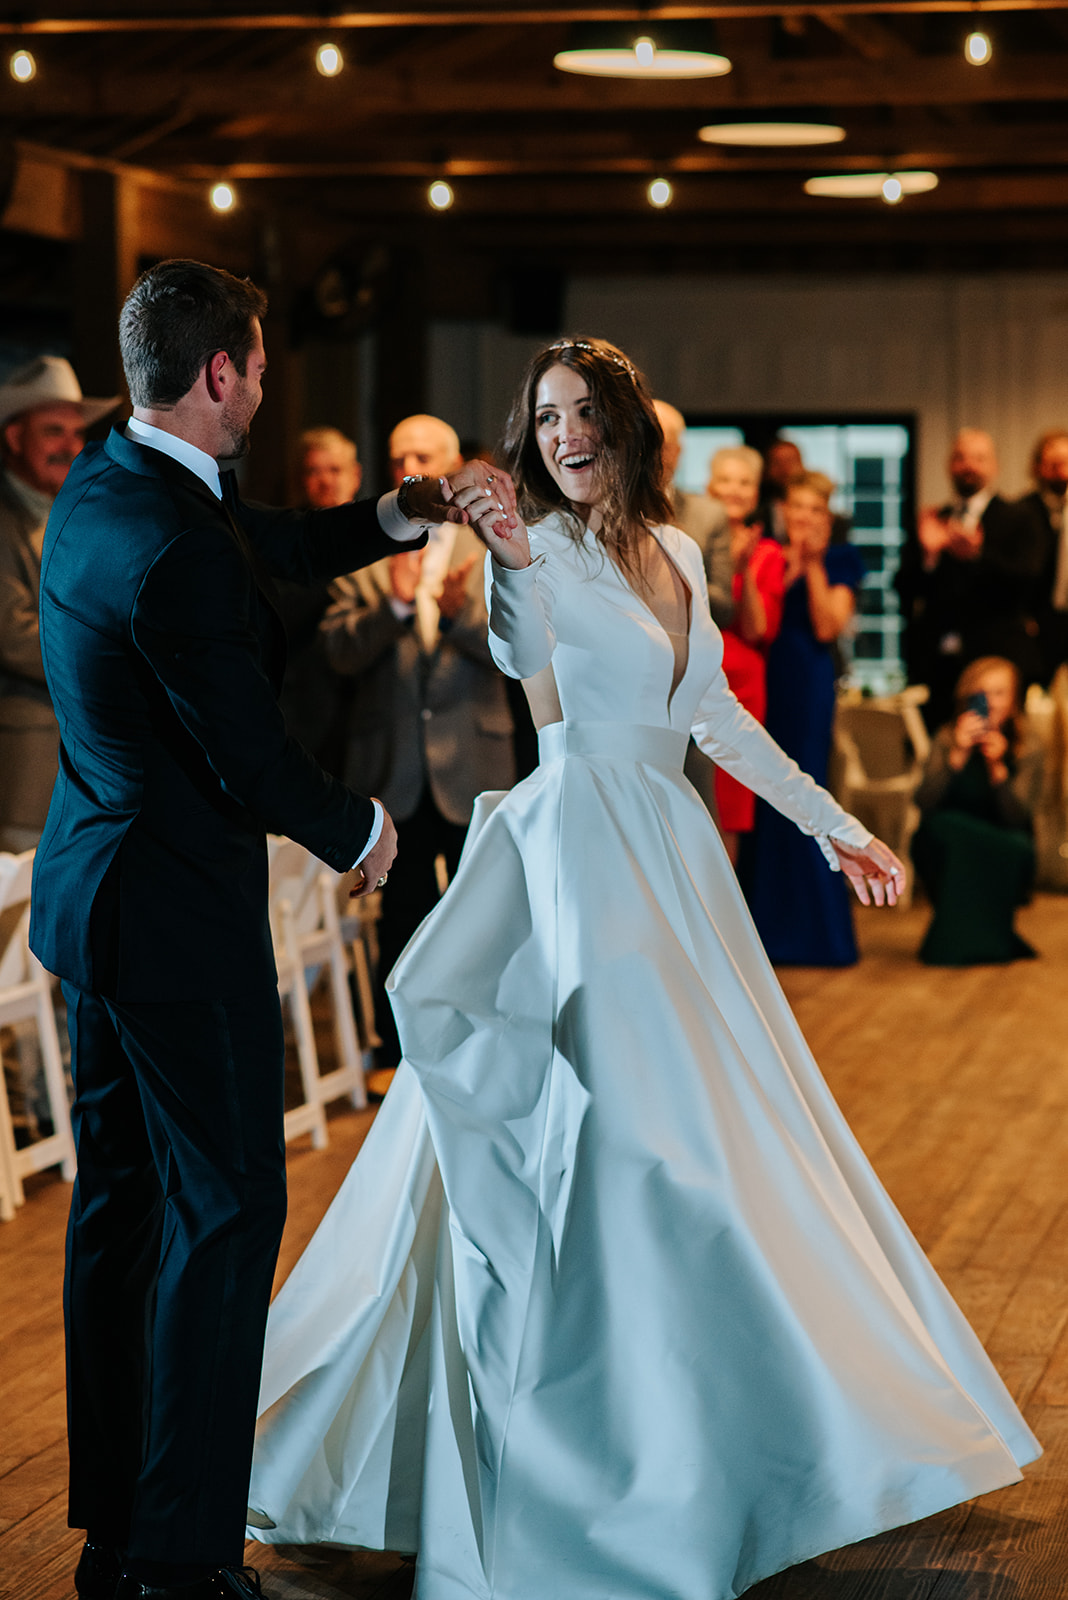 The groom twirls his bride on the dance floor at their winter wedding reception at 7F Lodge in College Station, TX.